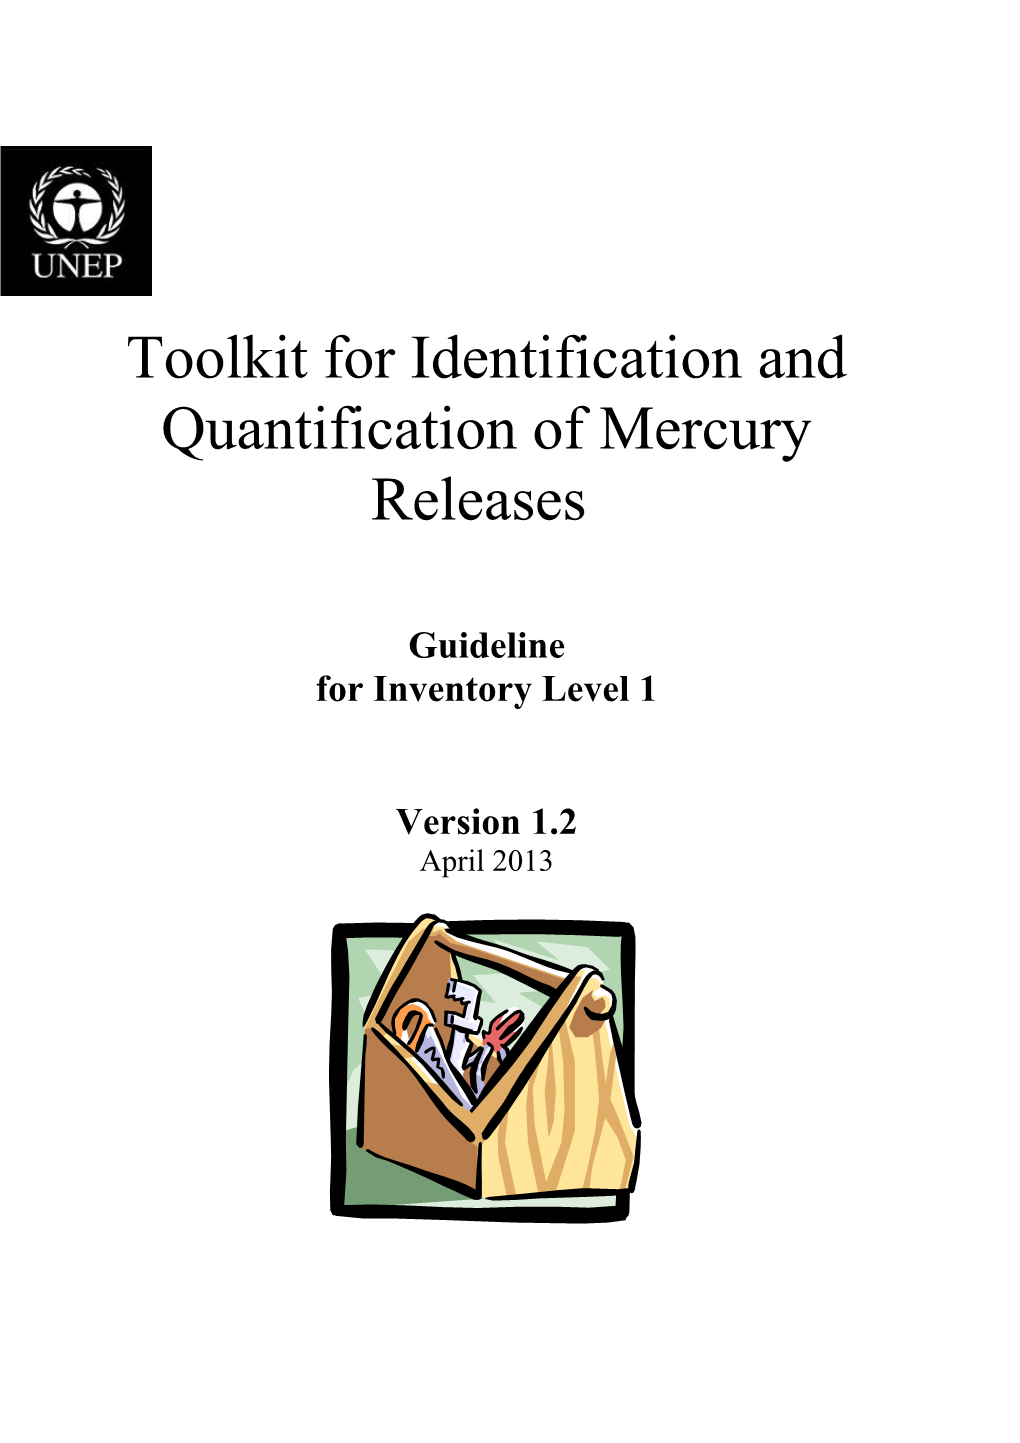 Mercury Inventory Toolkit - Guideline for Inventory Level 1 - UNEP Chemicals